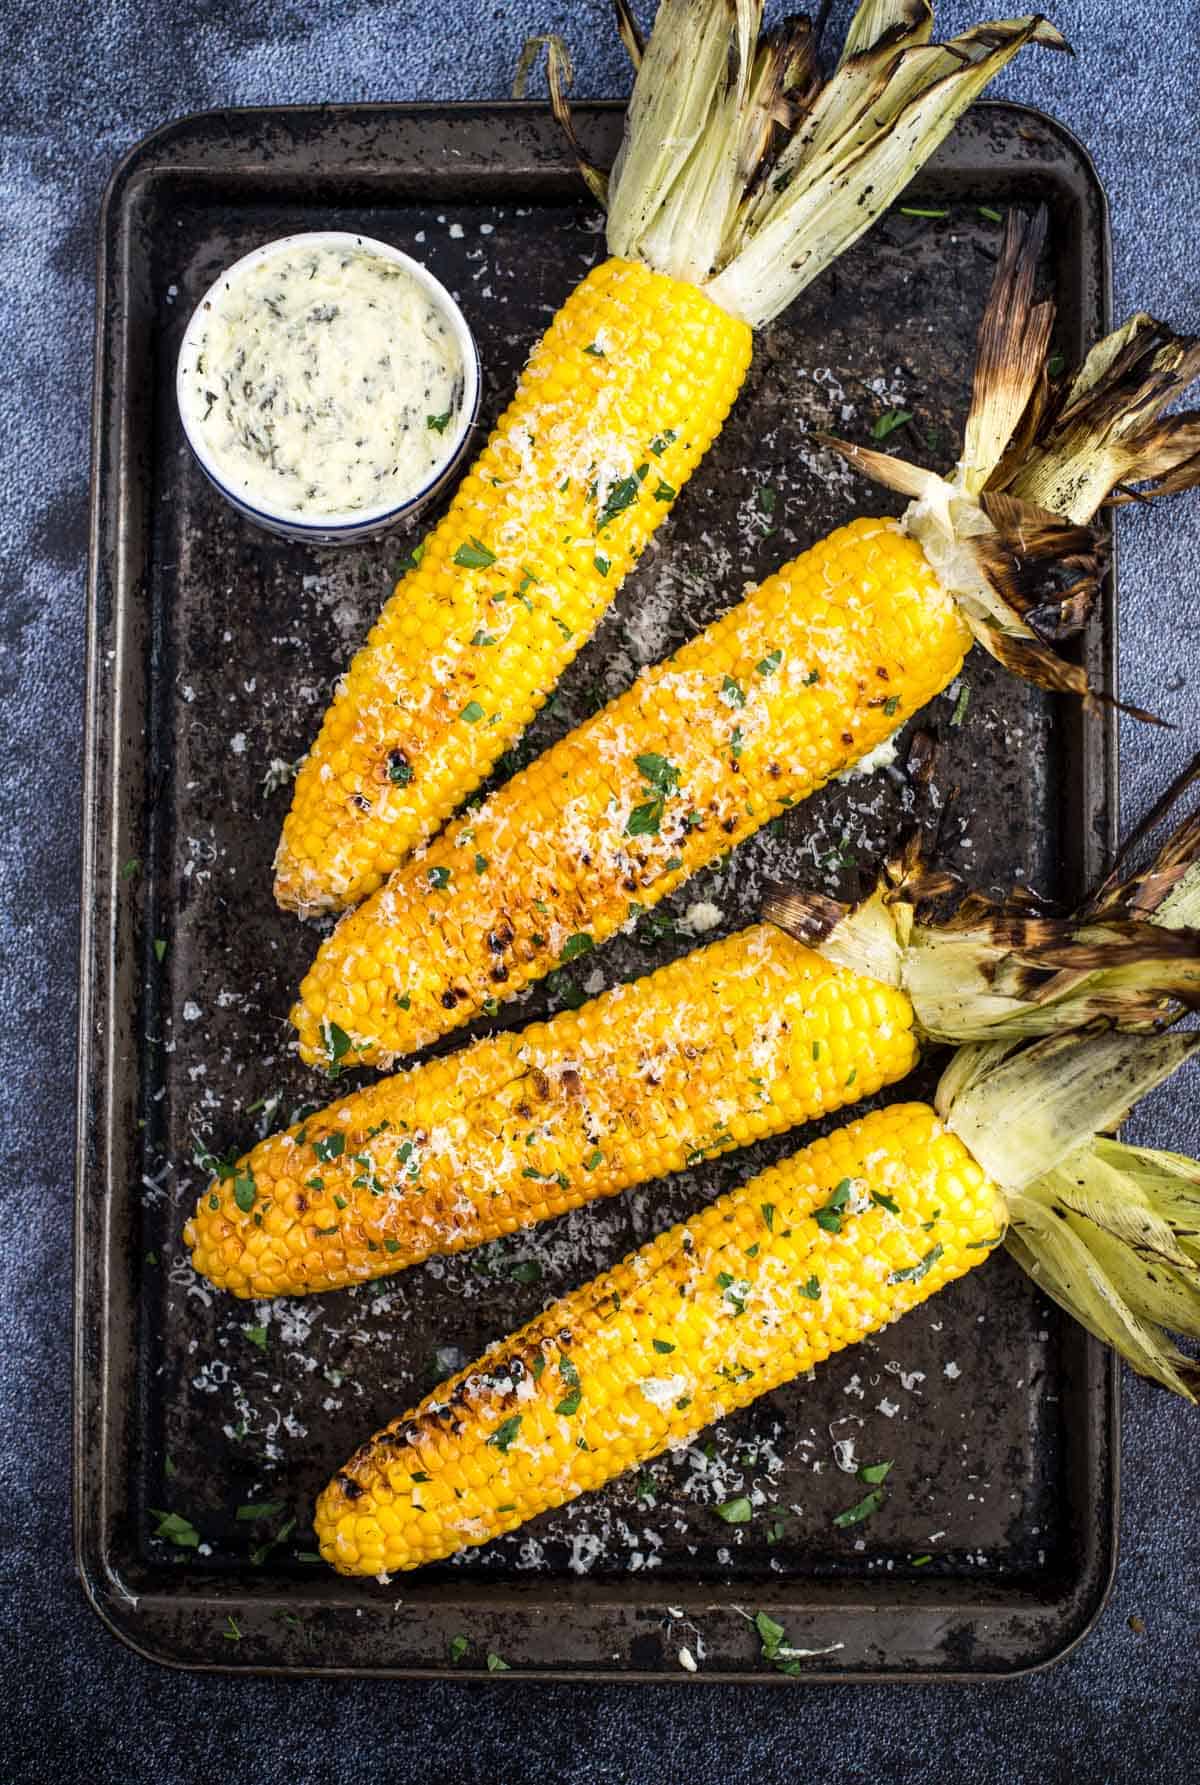 Grilled Corn on the Cob with compound herb butter.